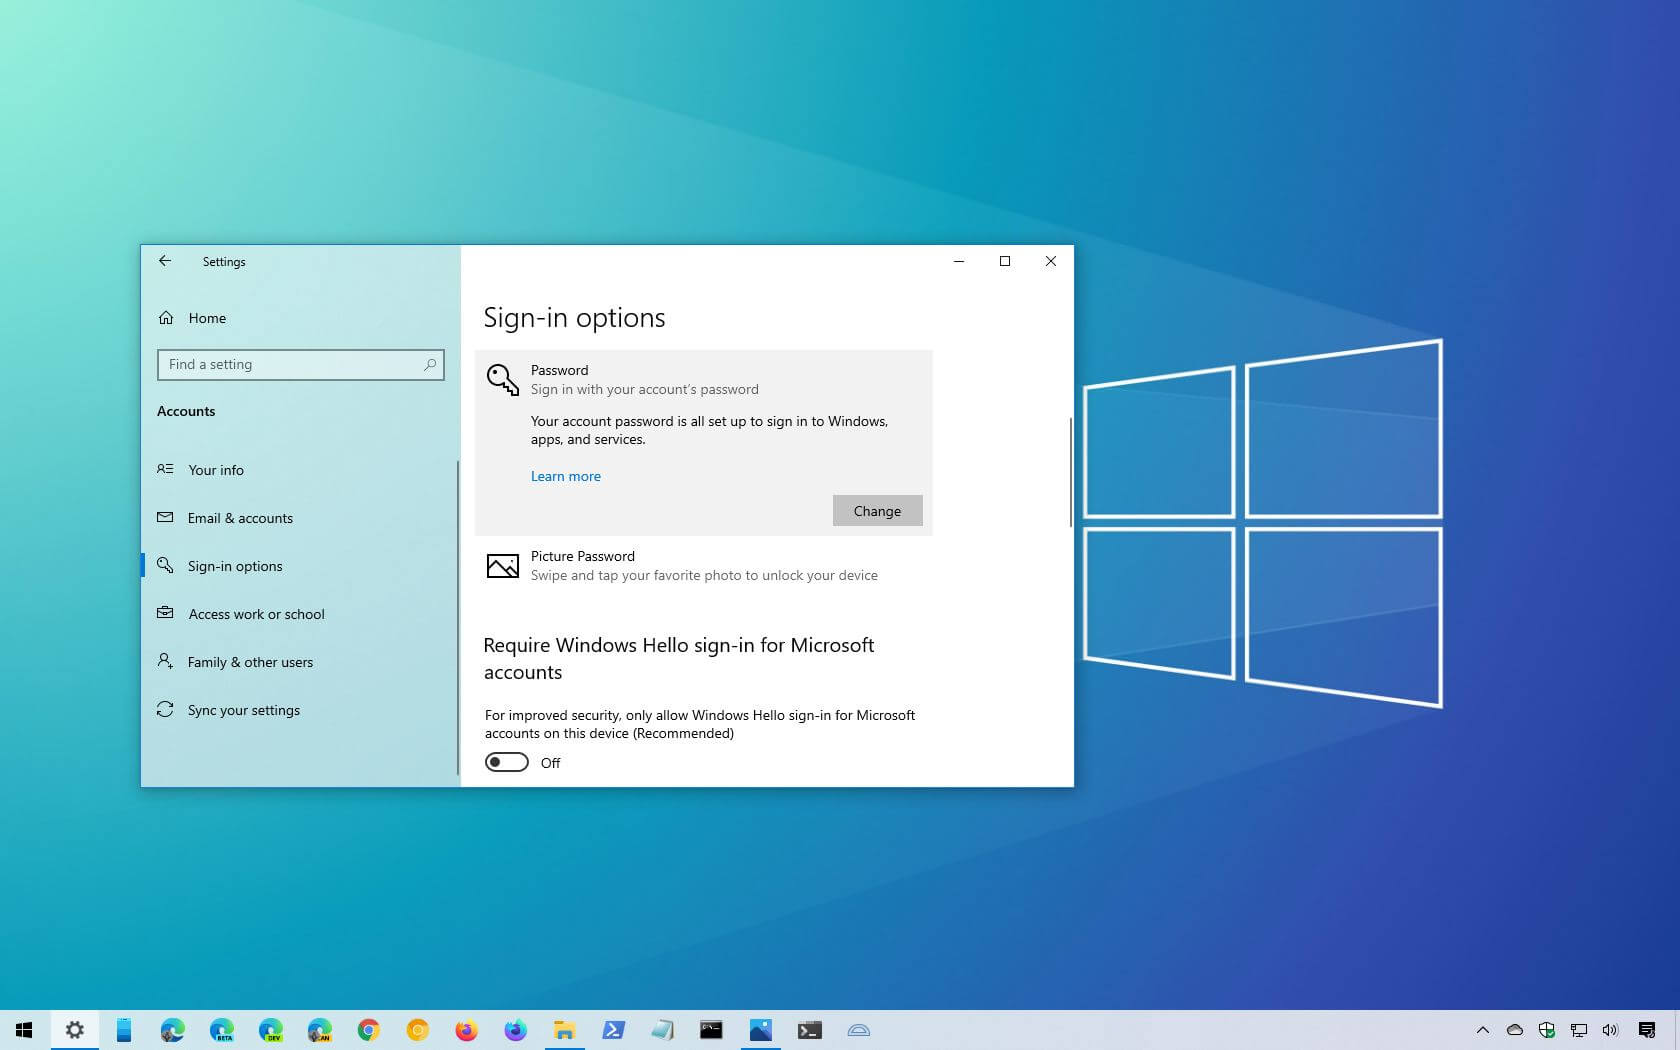 How to Remove Passwords From Windows 10?